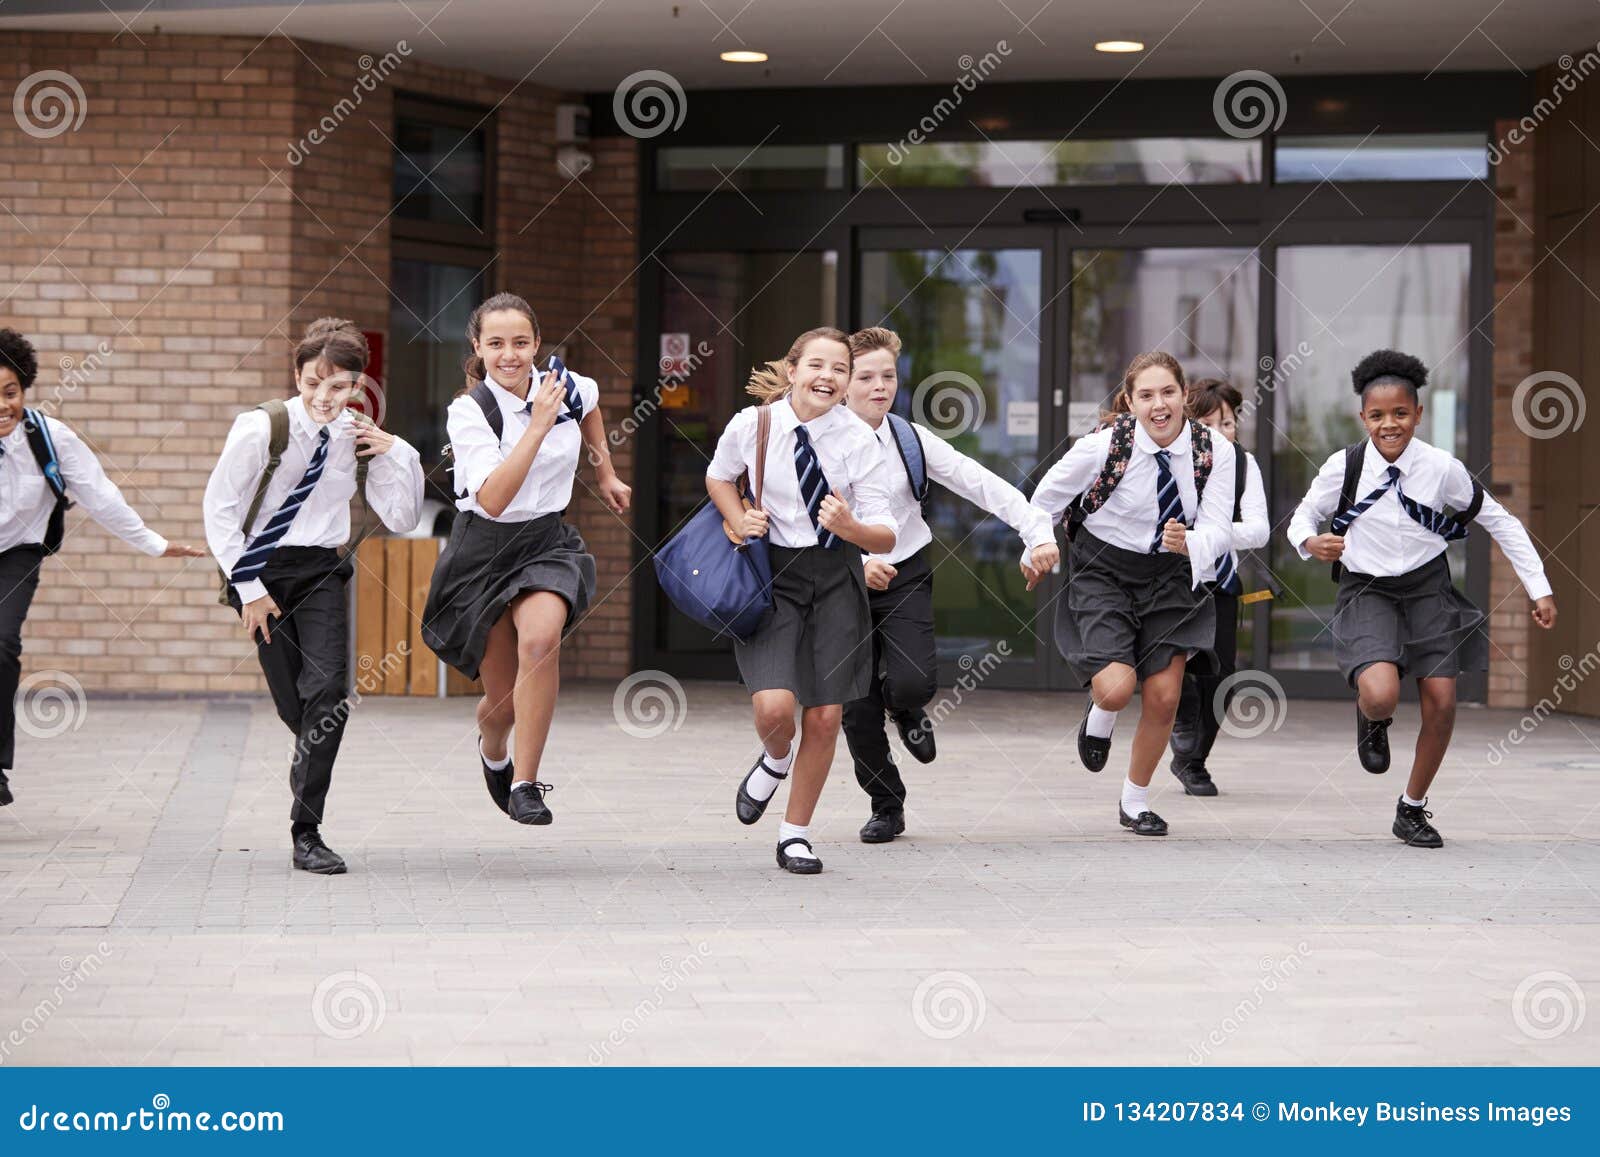 group of high school students wearing uniform running out of school buildings towards camera at the end of class